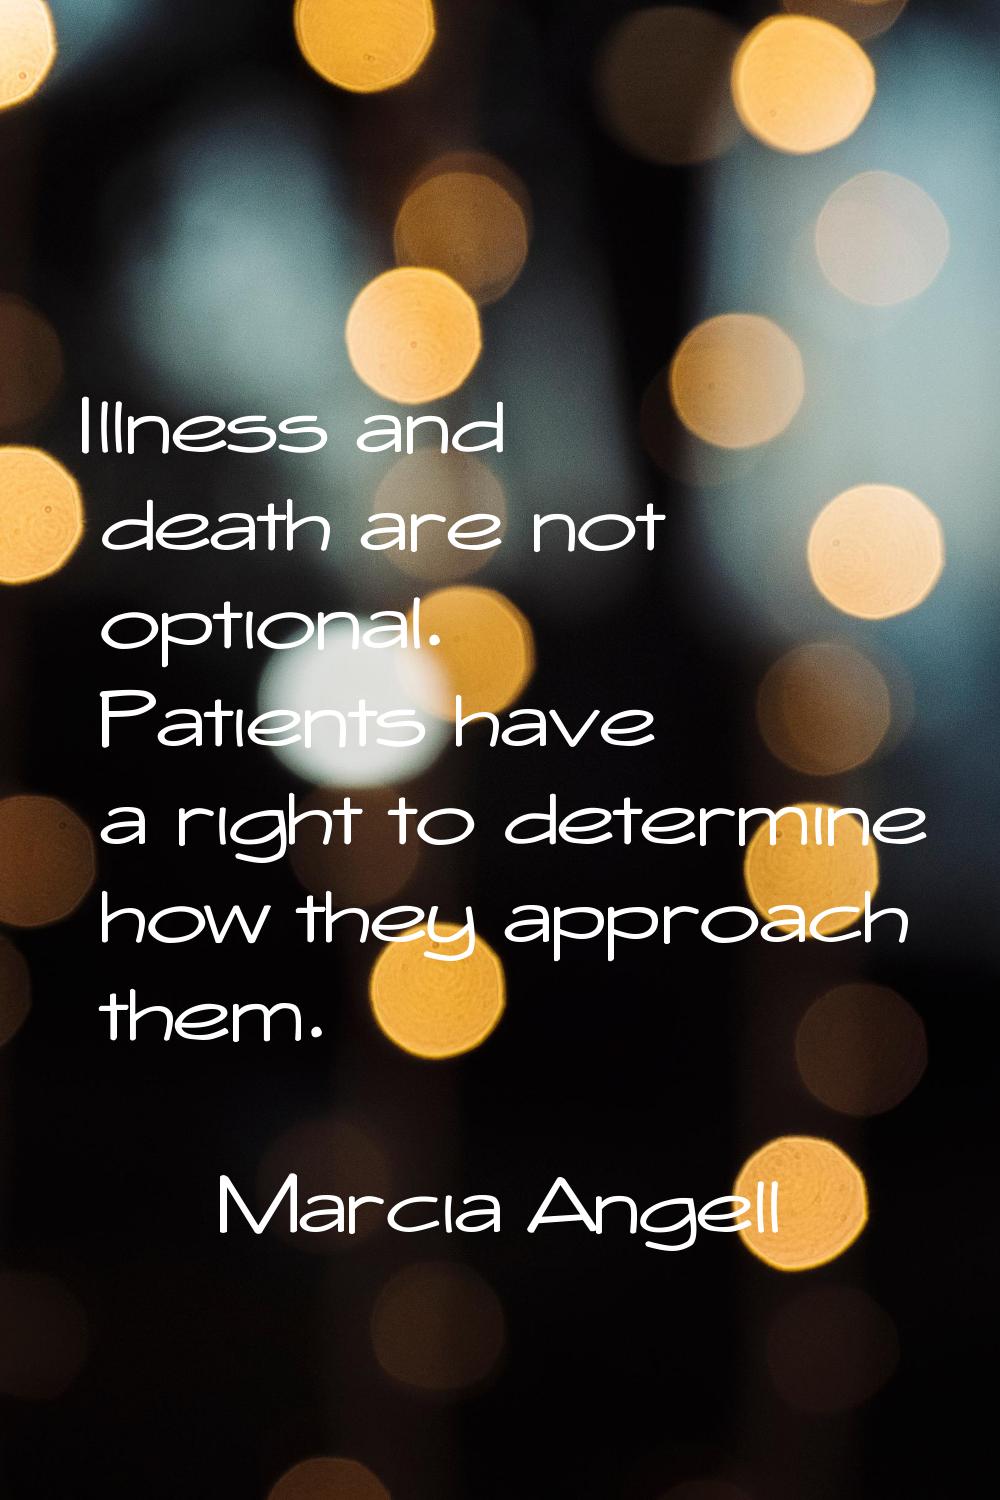 Illness and death are not optional. Patients have a right to determine how they approach them.